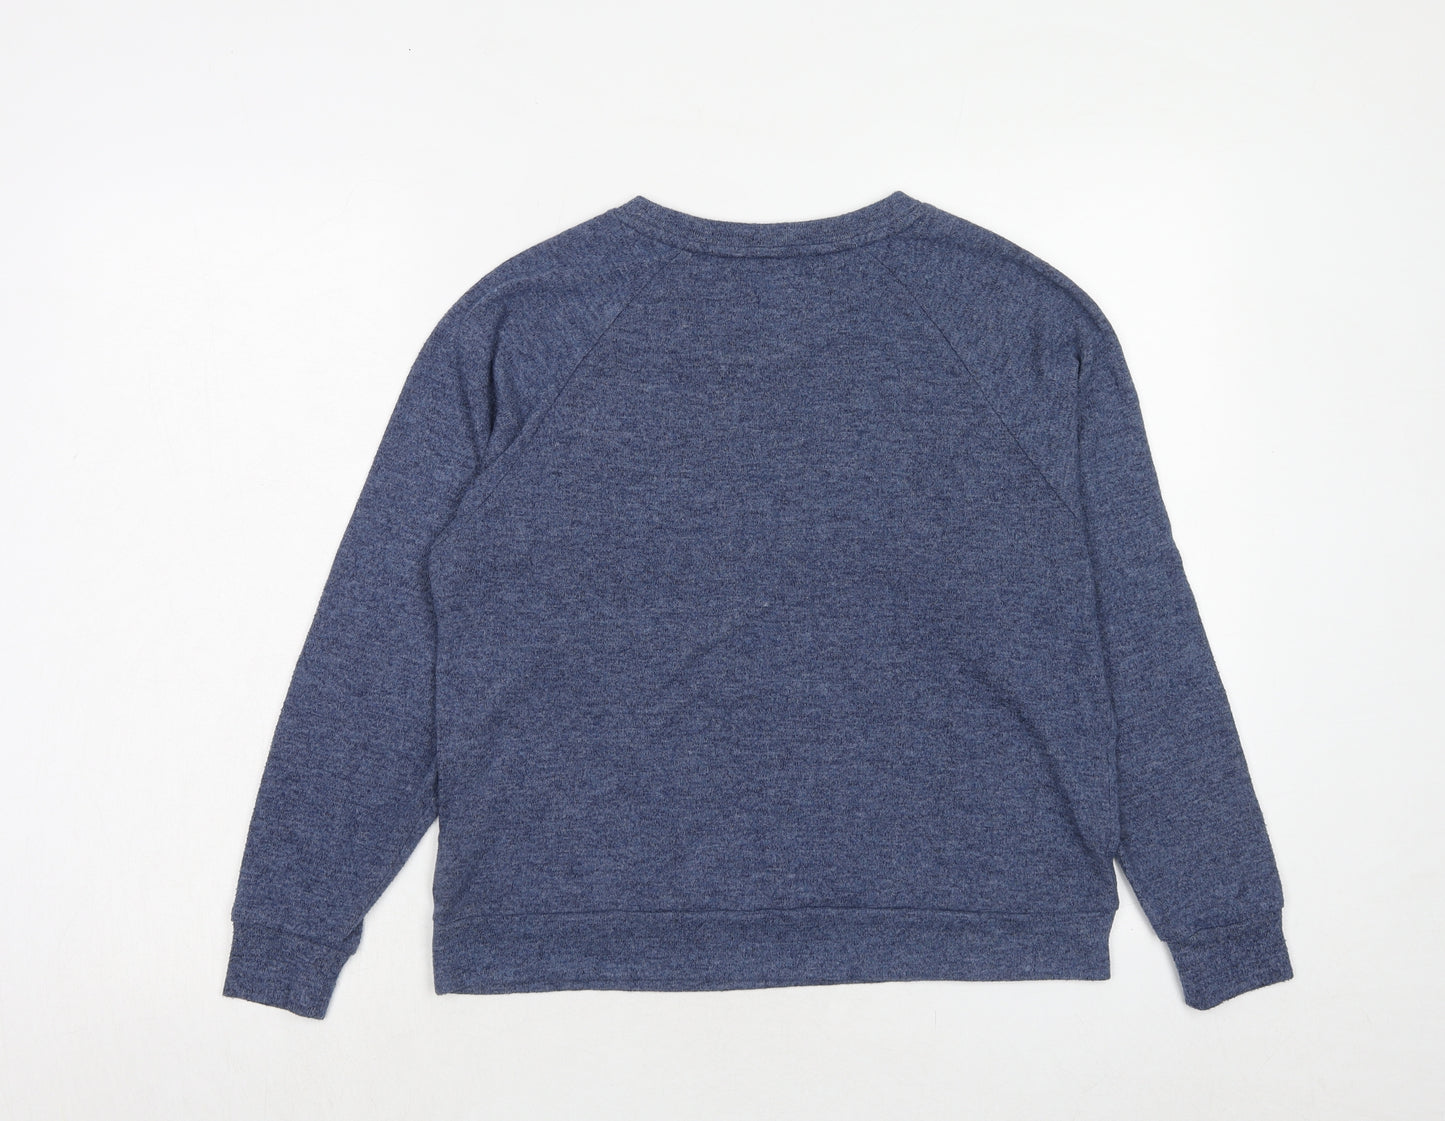 New Look Womens Blue Polyester Pullover Sweatshirt Size S Pullover - Kinda Care Kinda Don't